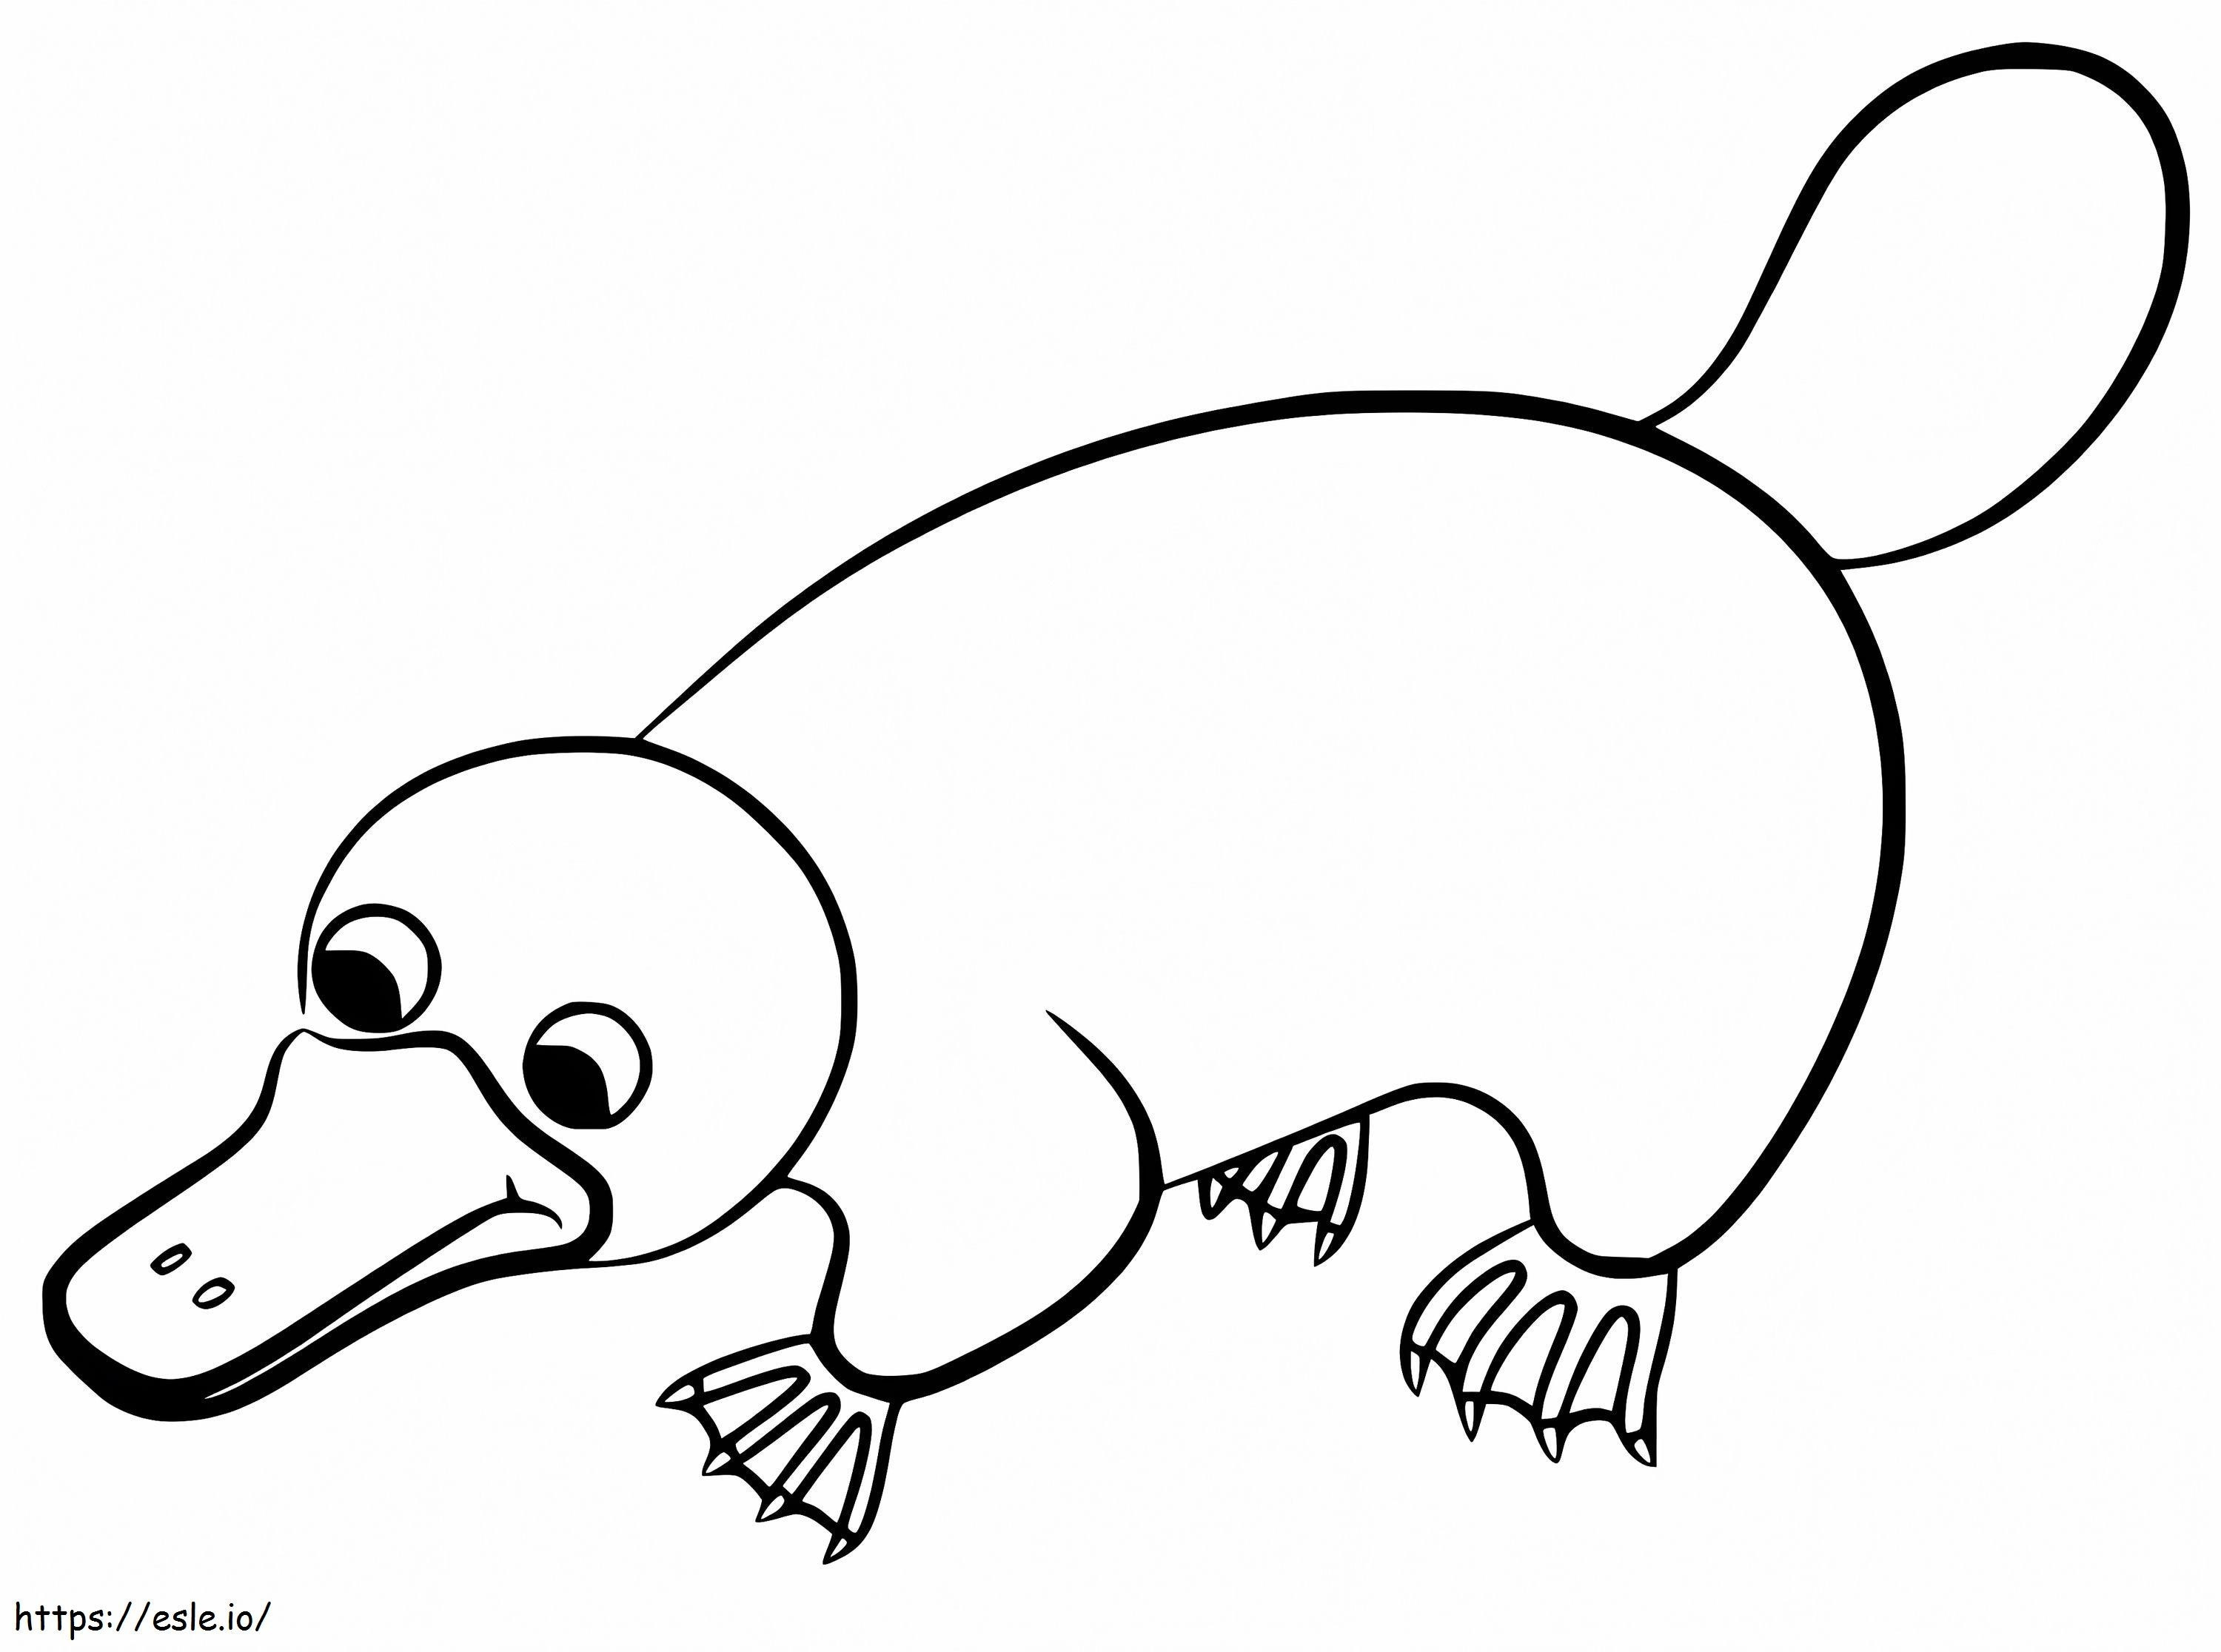 A Funny Platypus coloring page